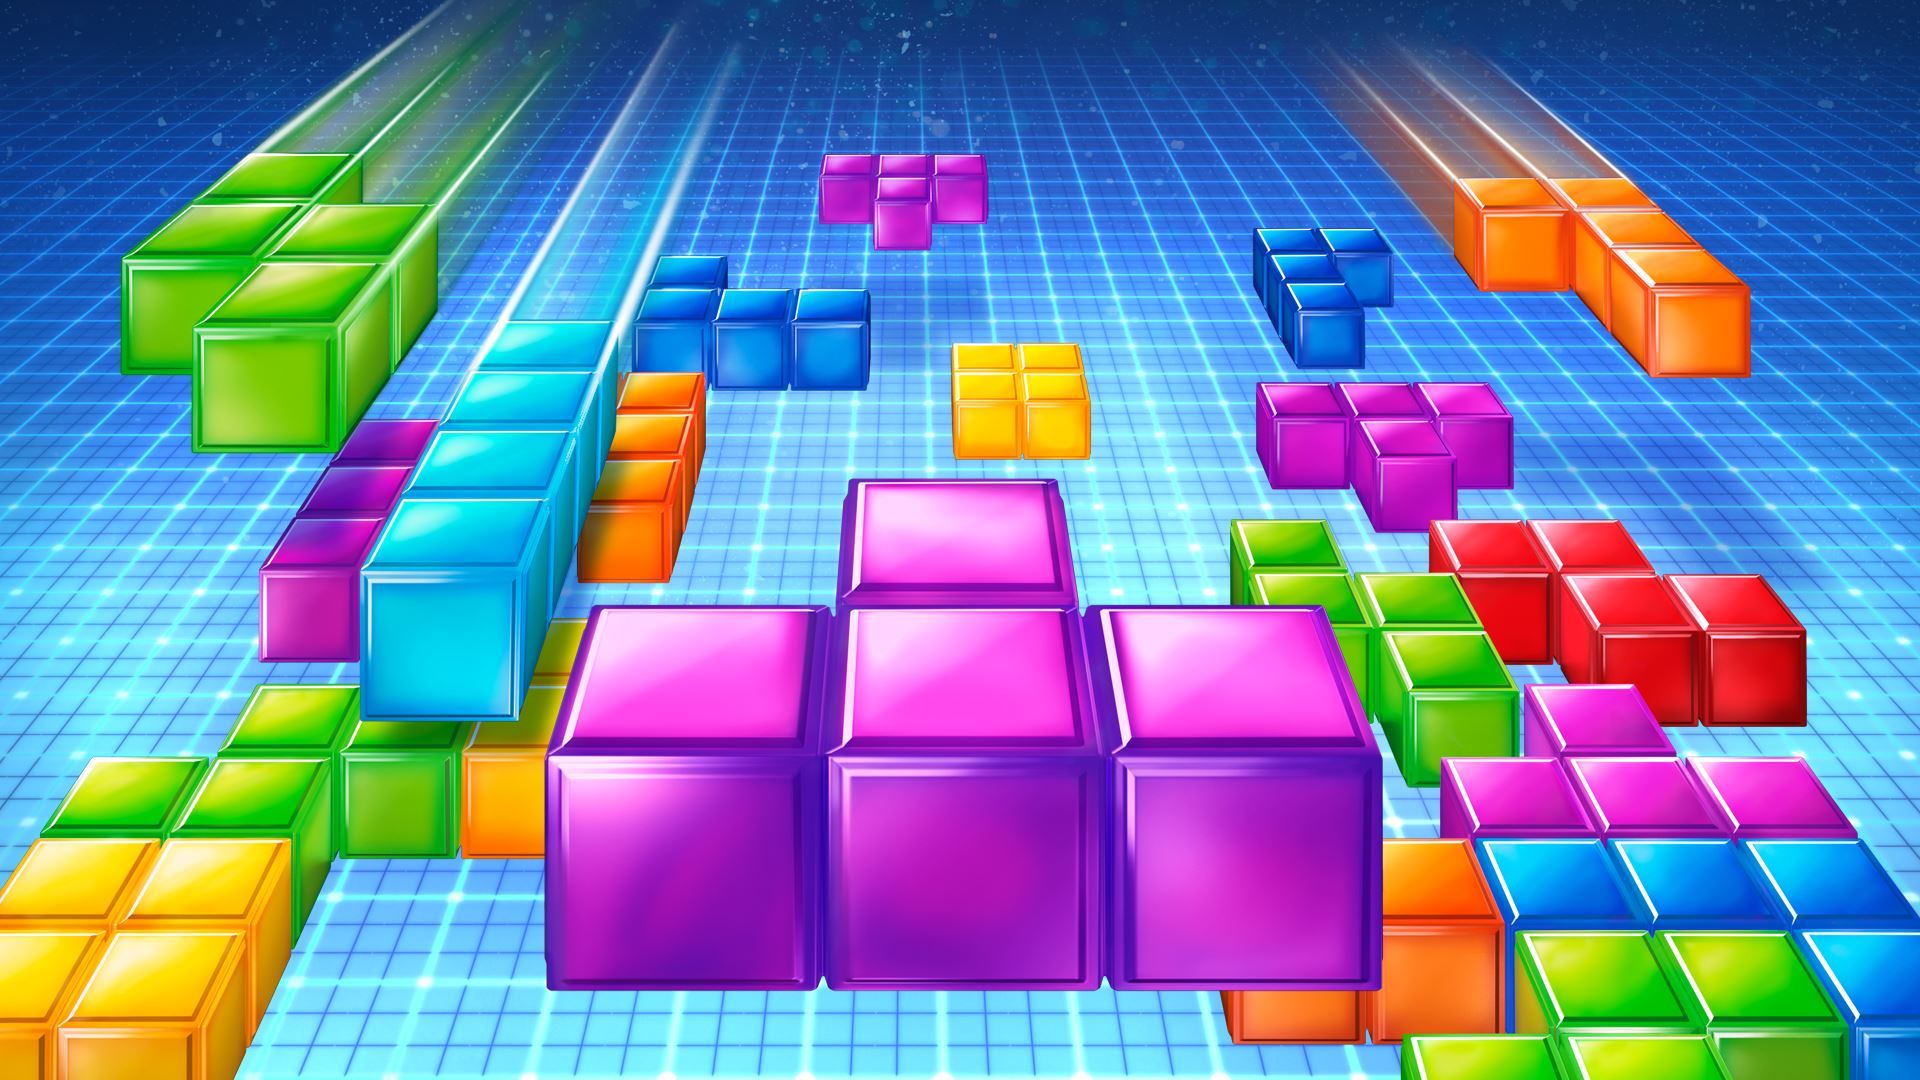 Tetris' Stays True to Real-Life Events Based on Video Game's Origin